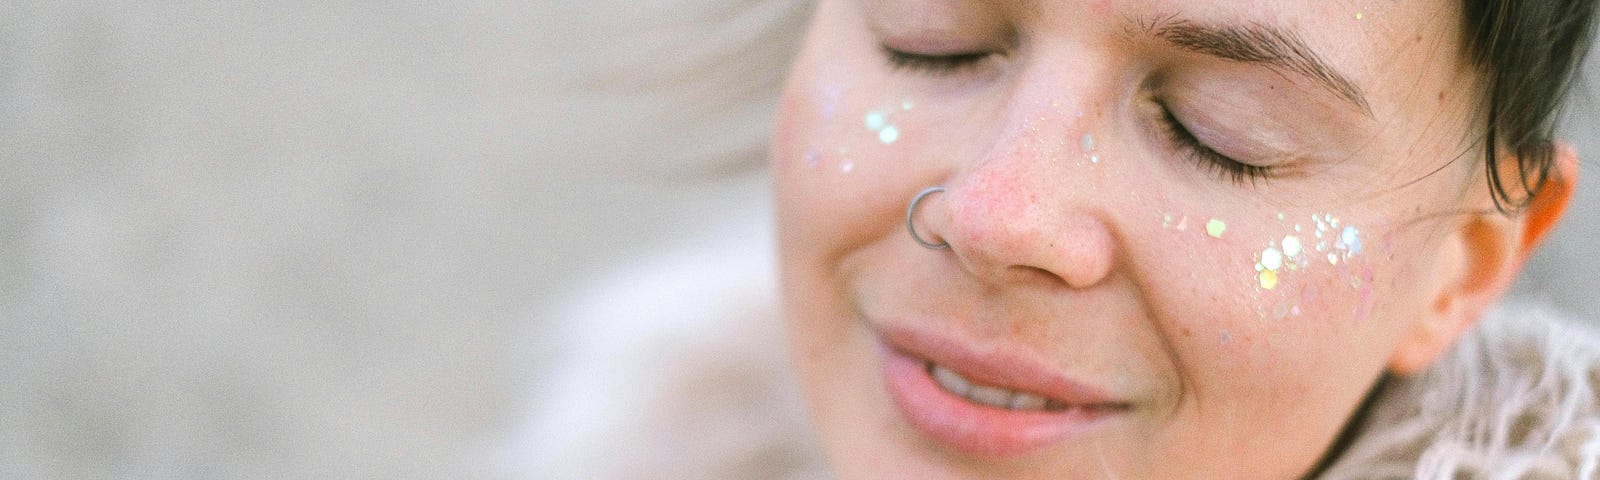 A young woman with glitter on her cheeks smiles gently with closed eyes